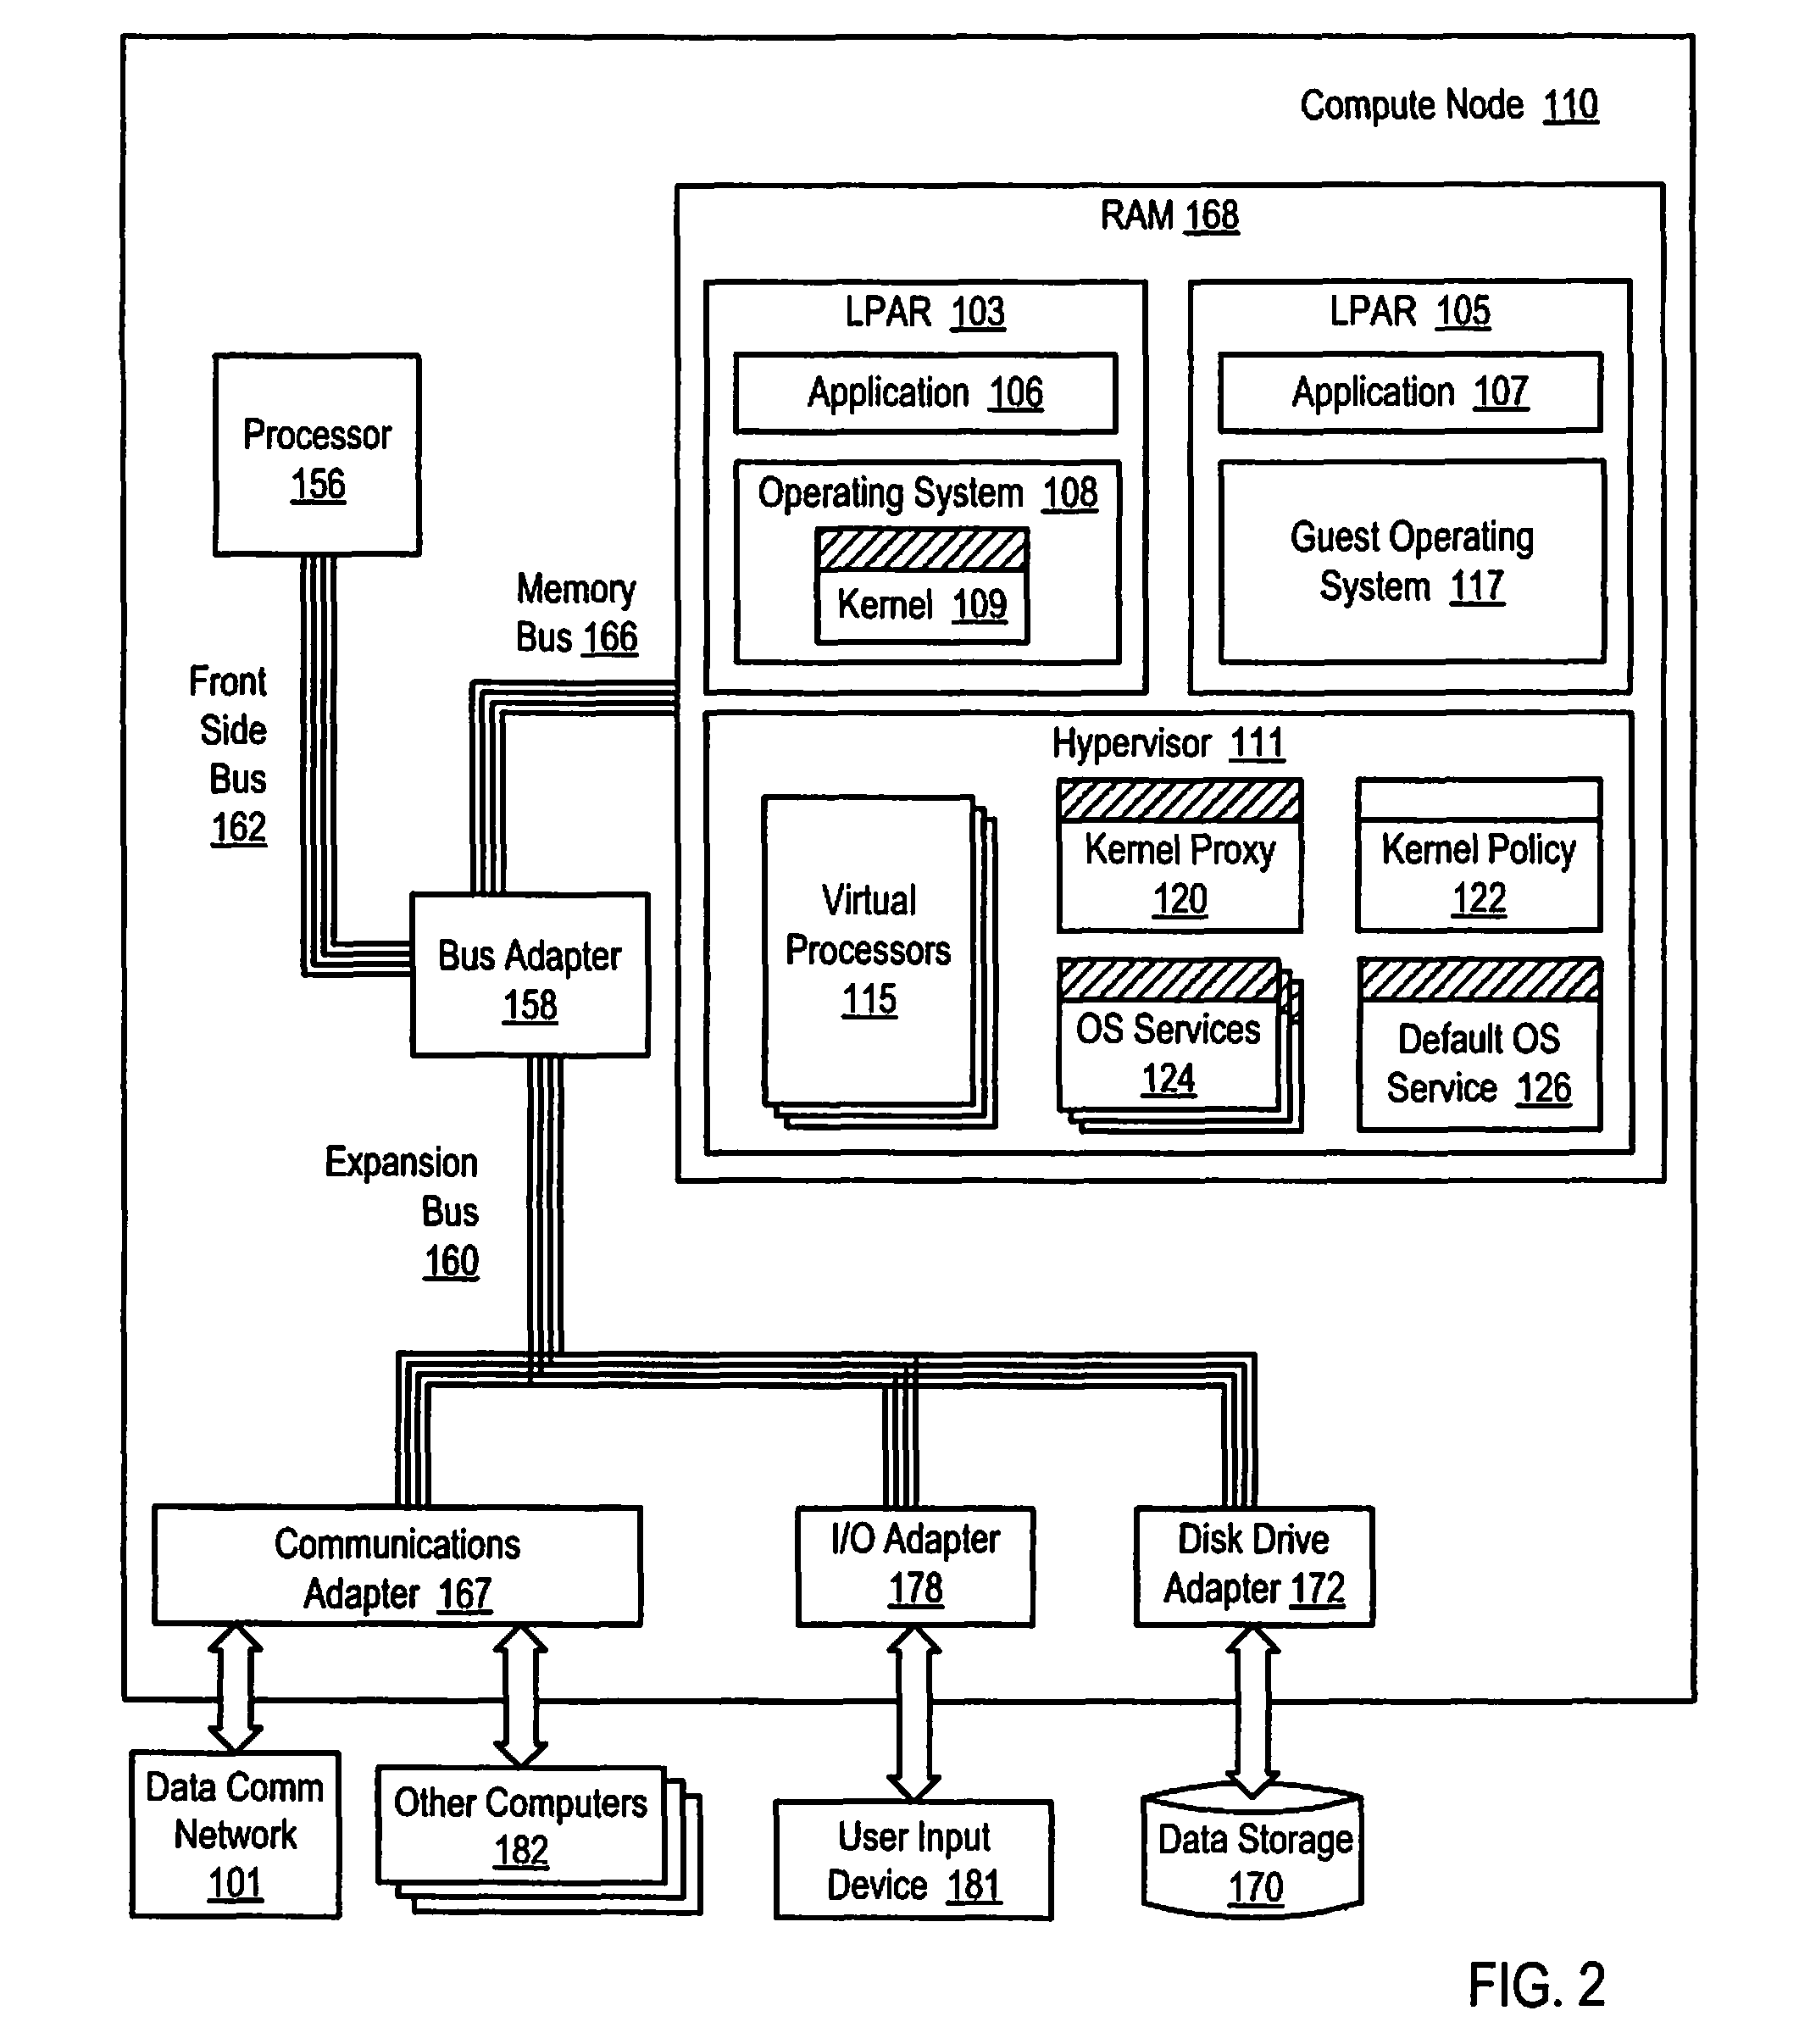 Providing policy-based operating system services in a hypervisor on a computing system